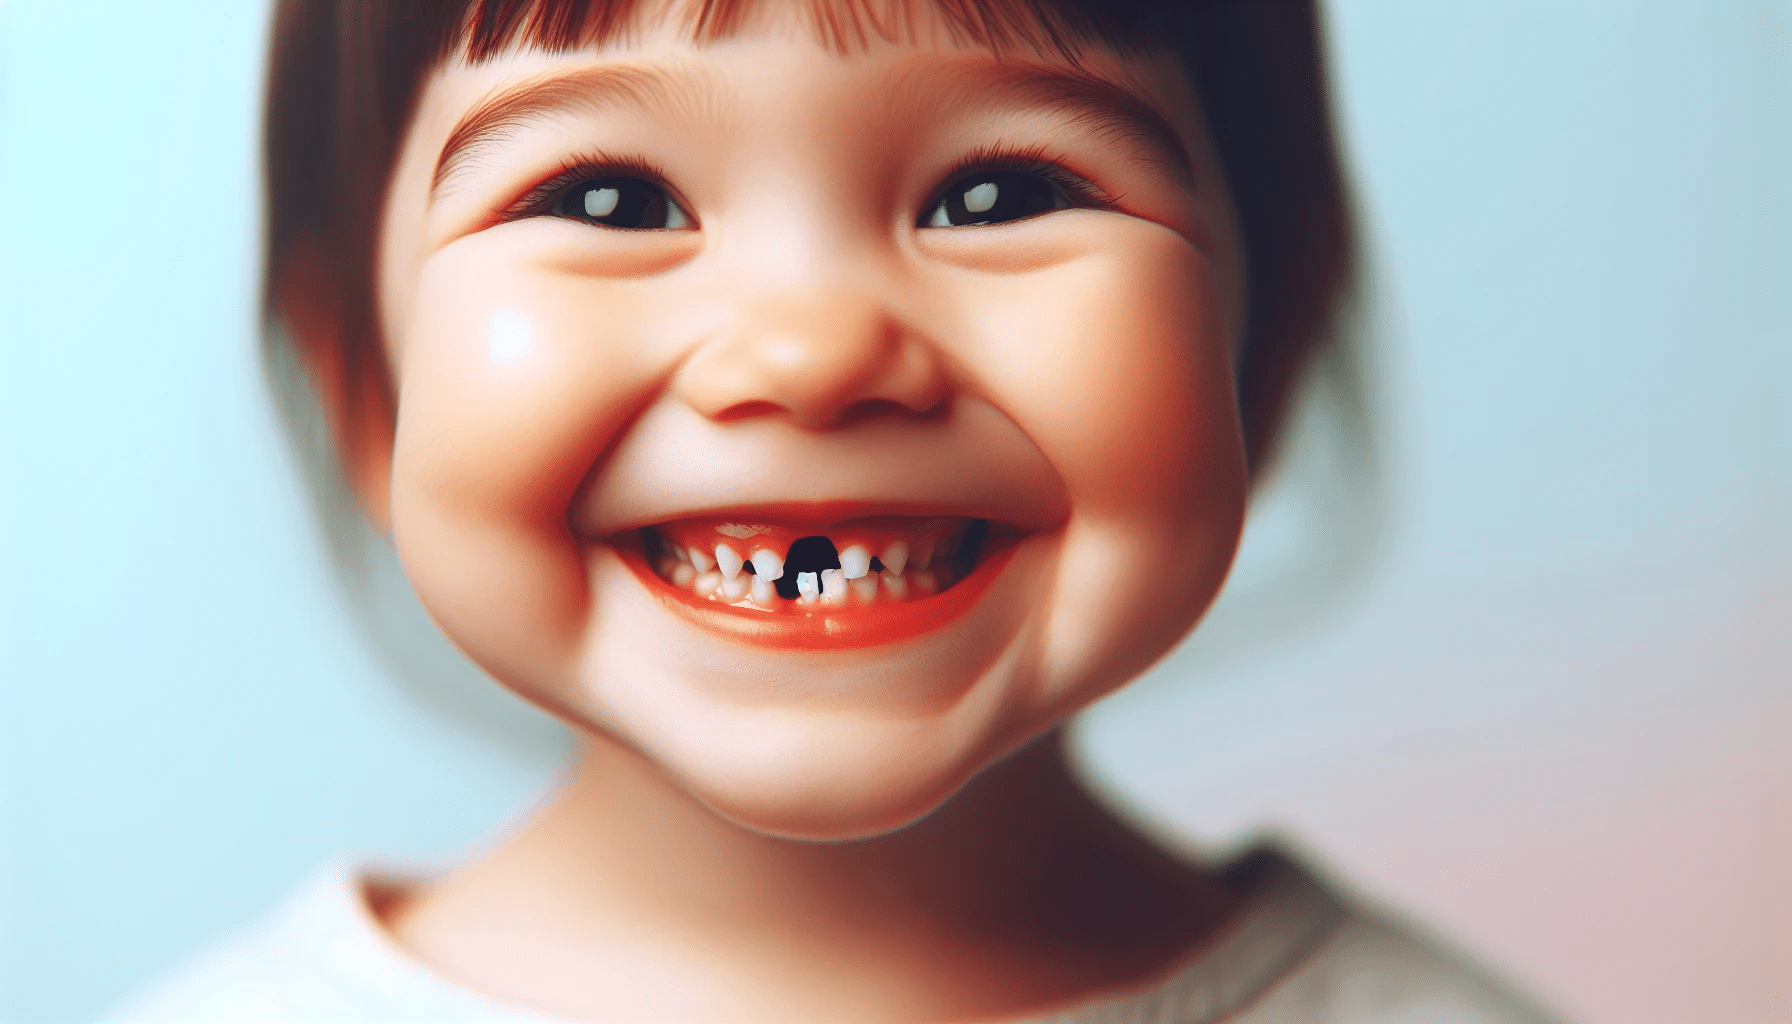 Illustration Of A Child'S Smile With Missing Teeth